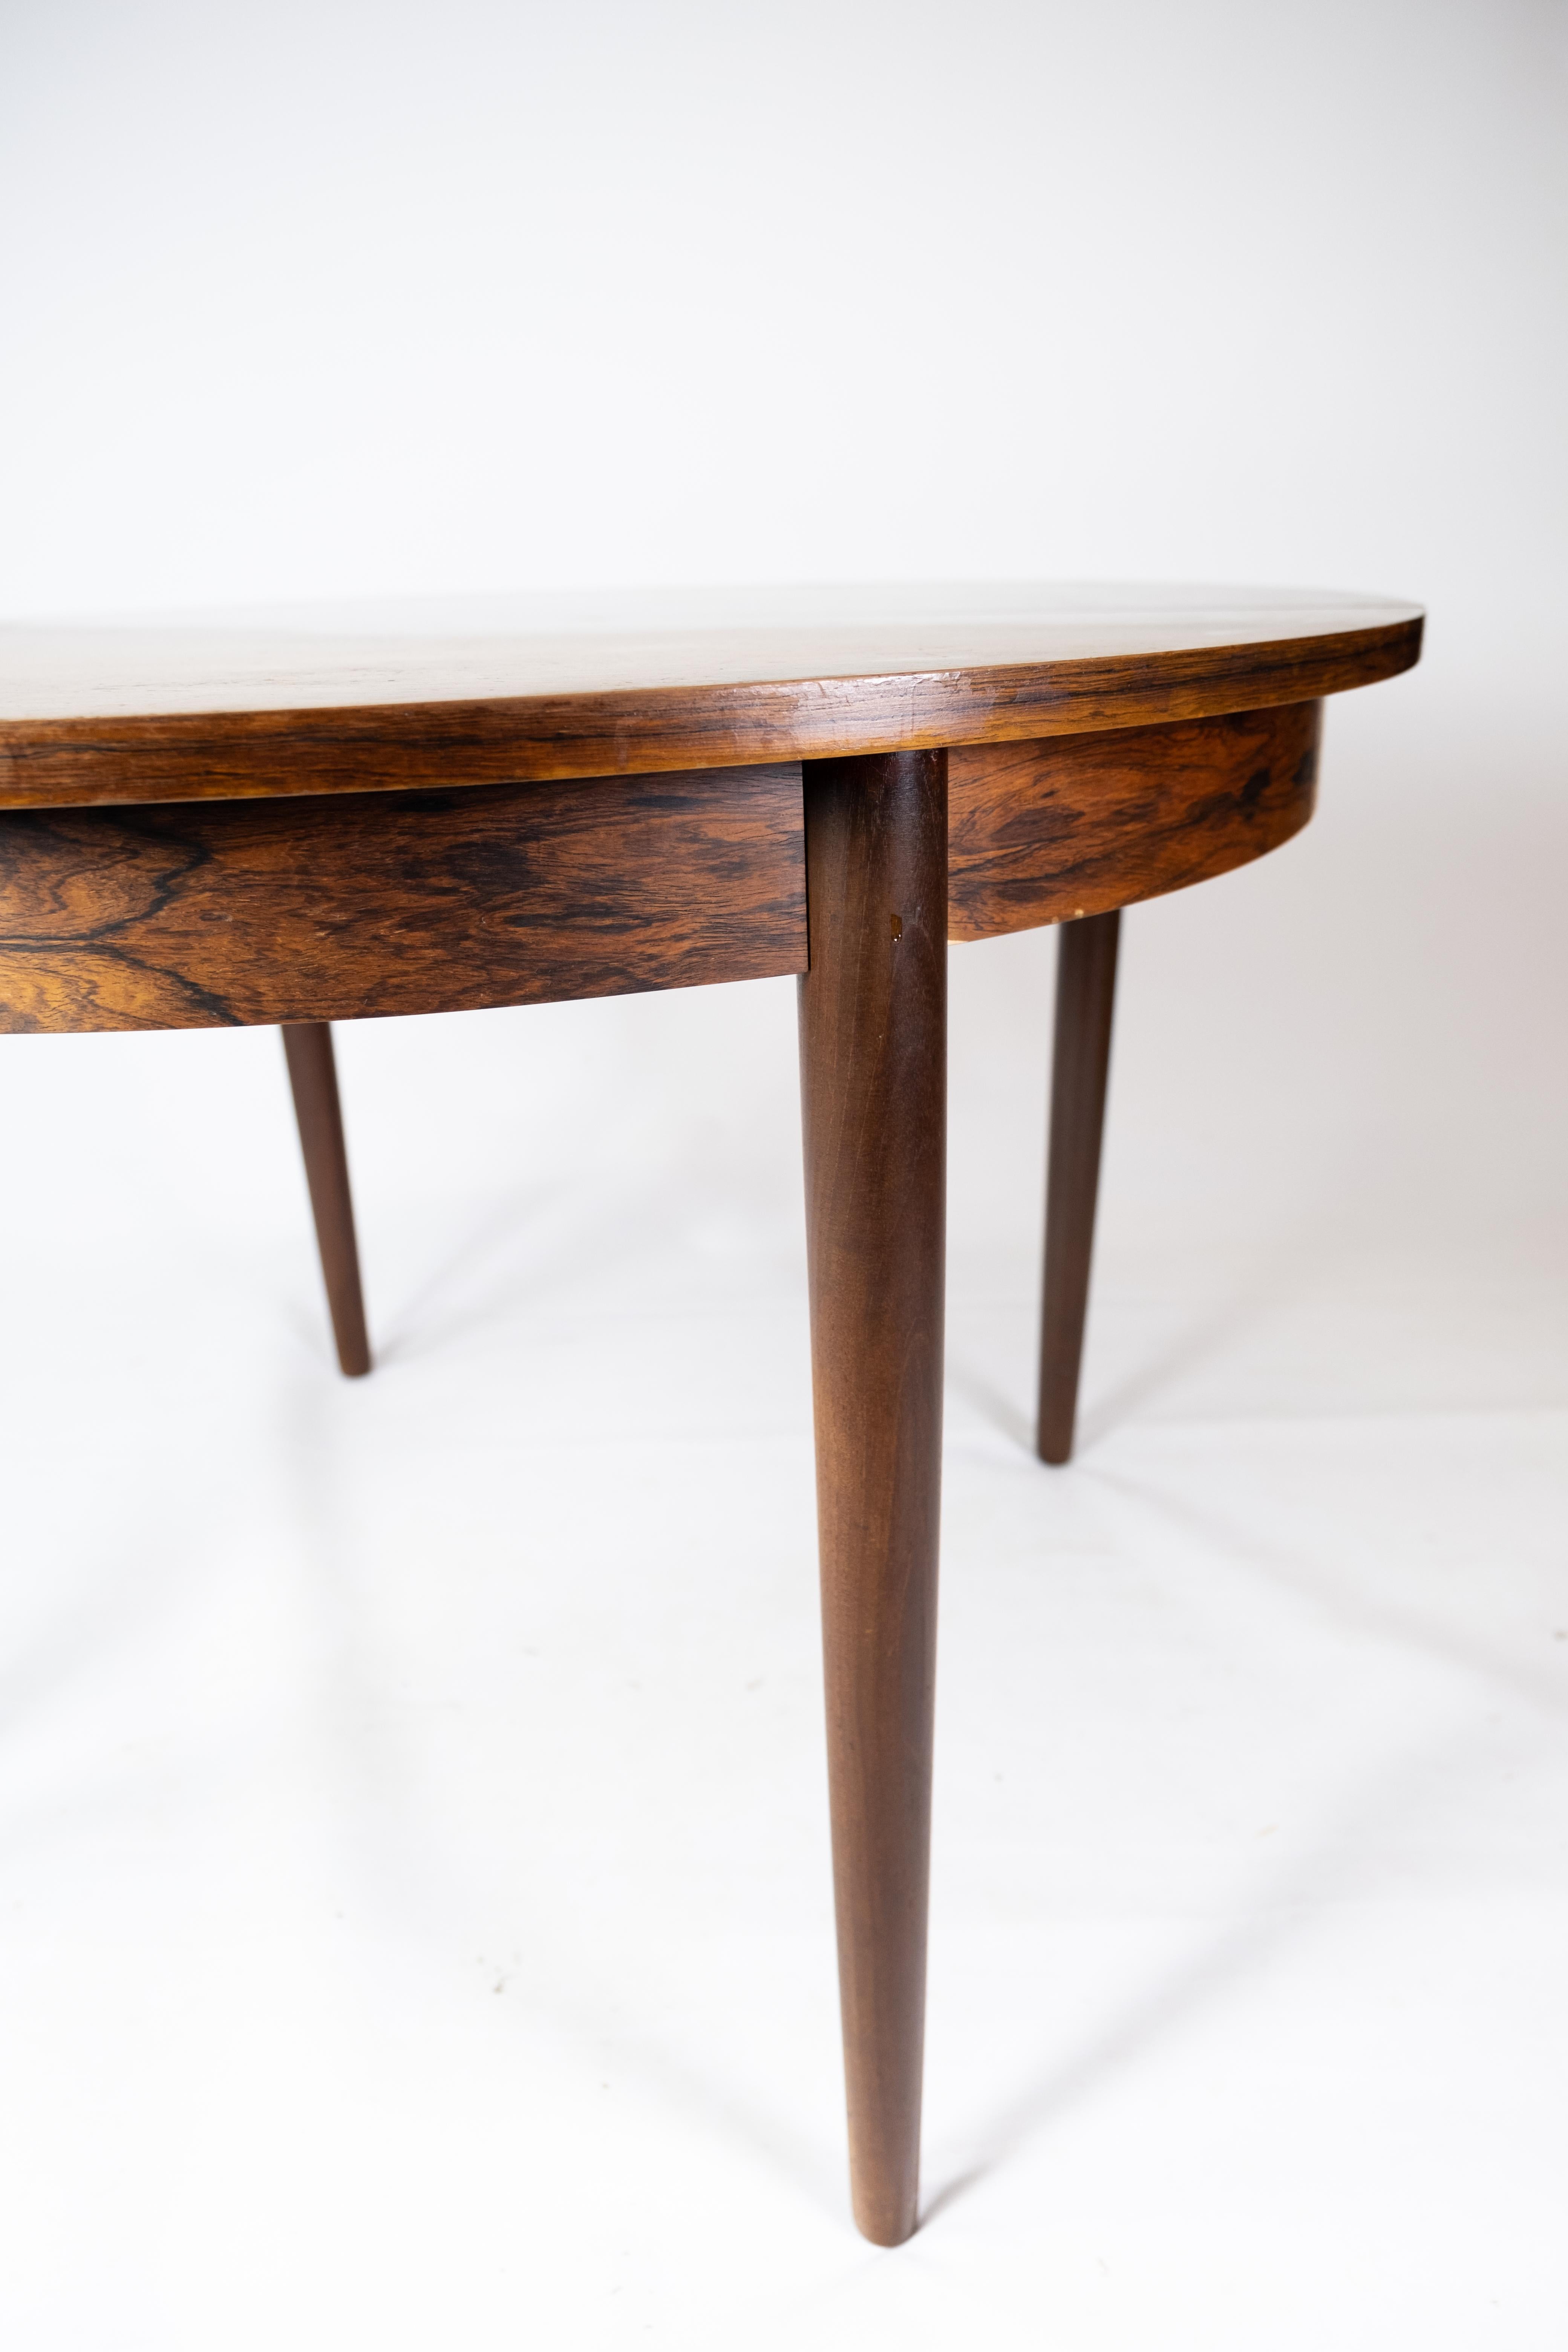 This rosewood dining table from the 1960s is an iconic example of Danish furniture design. The table is created with care and expertise, and its timeless aesthetic fits perfectly with modern decor.

The deep color and unique grain structure of the